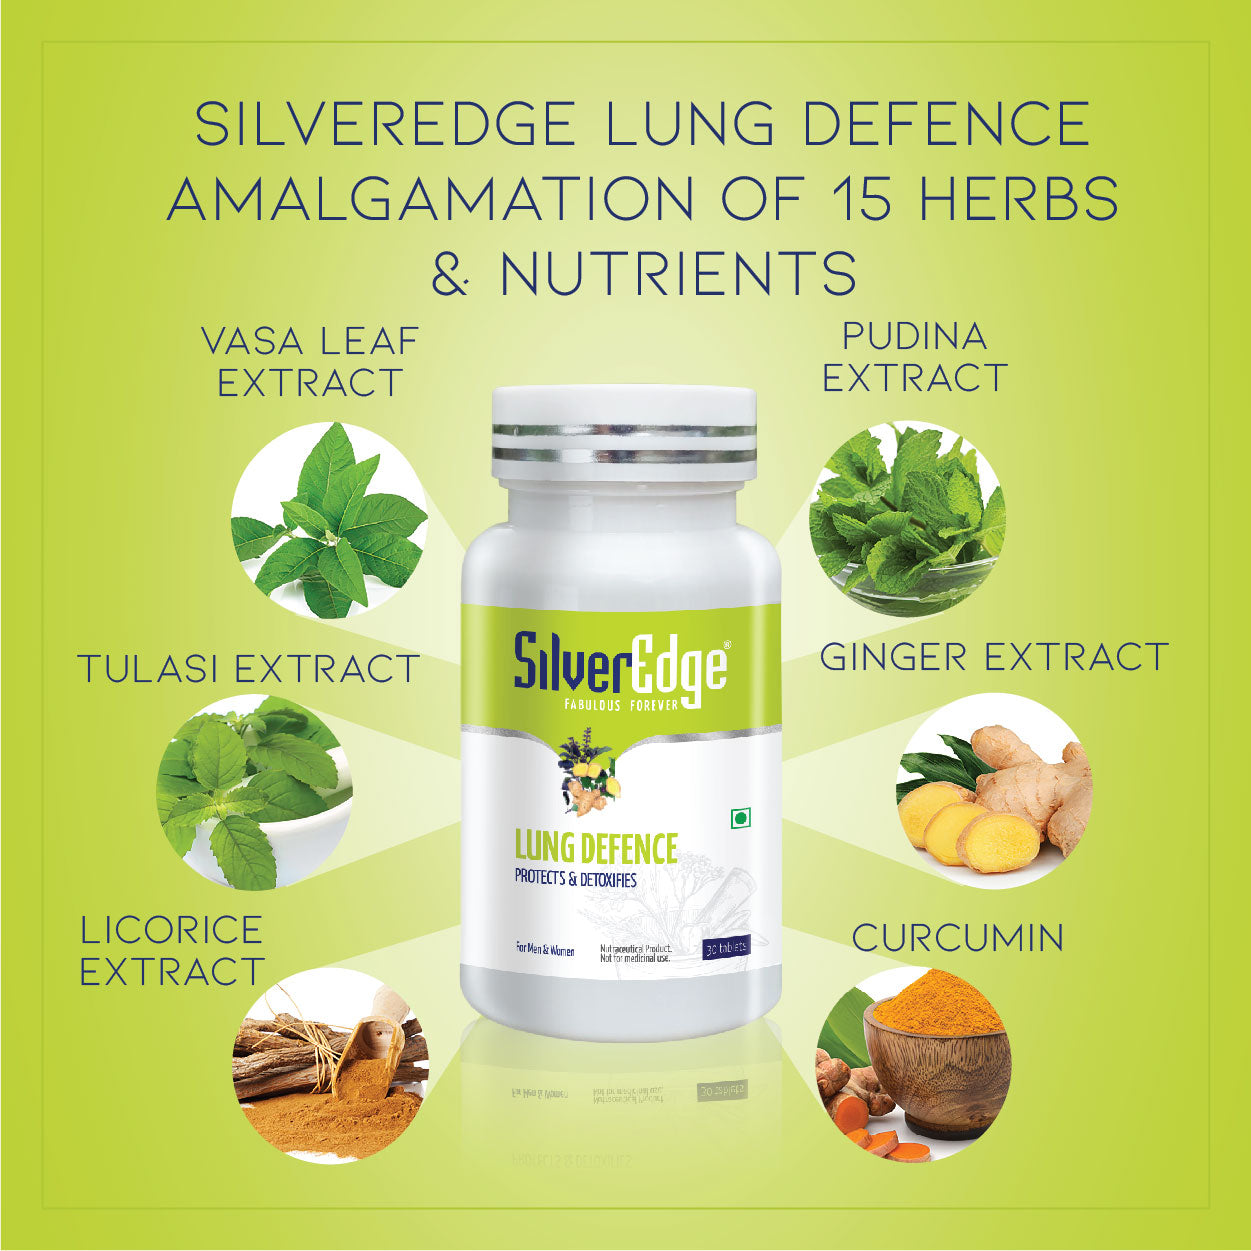 natural lung care tablets for better breathing, natural lung care tablets, lung care tablets, buy lung defense tablets in india, best Lung detox tablets, SilverEdge, tablets, lung care, lung defense tablets in india, buy lung defense tablets, lung defense tablets, lung detox tablets, india